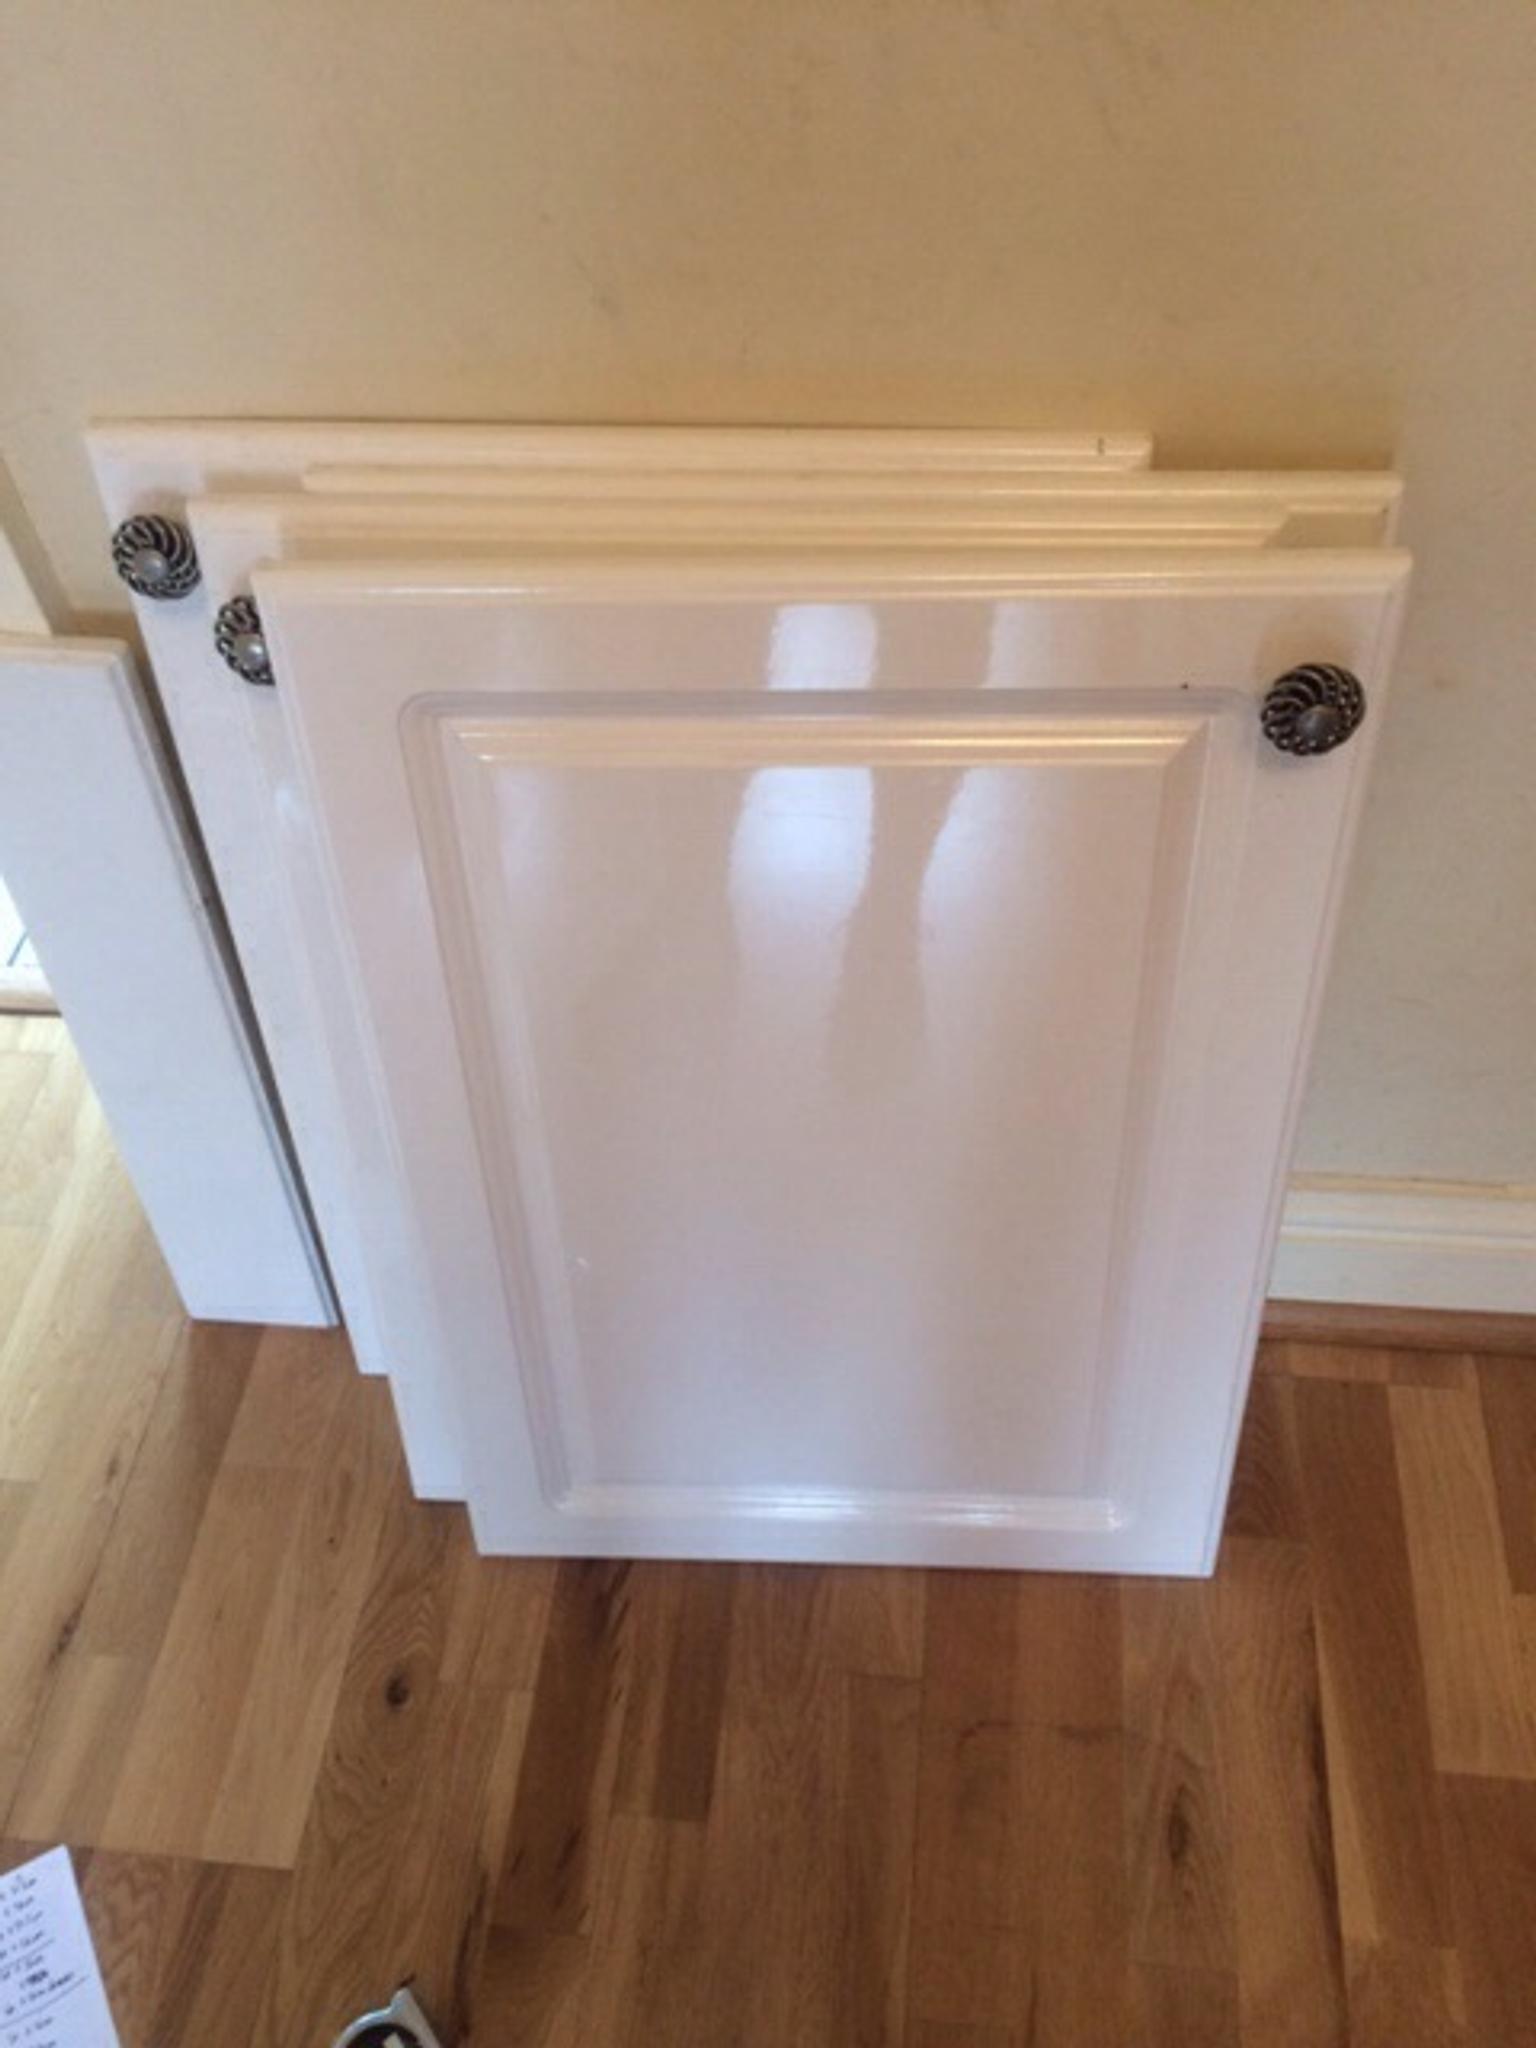 B Q White Kitchen Door And Drawer Fronts In Sk5 Stockport For